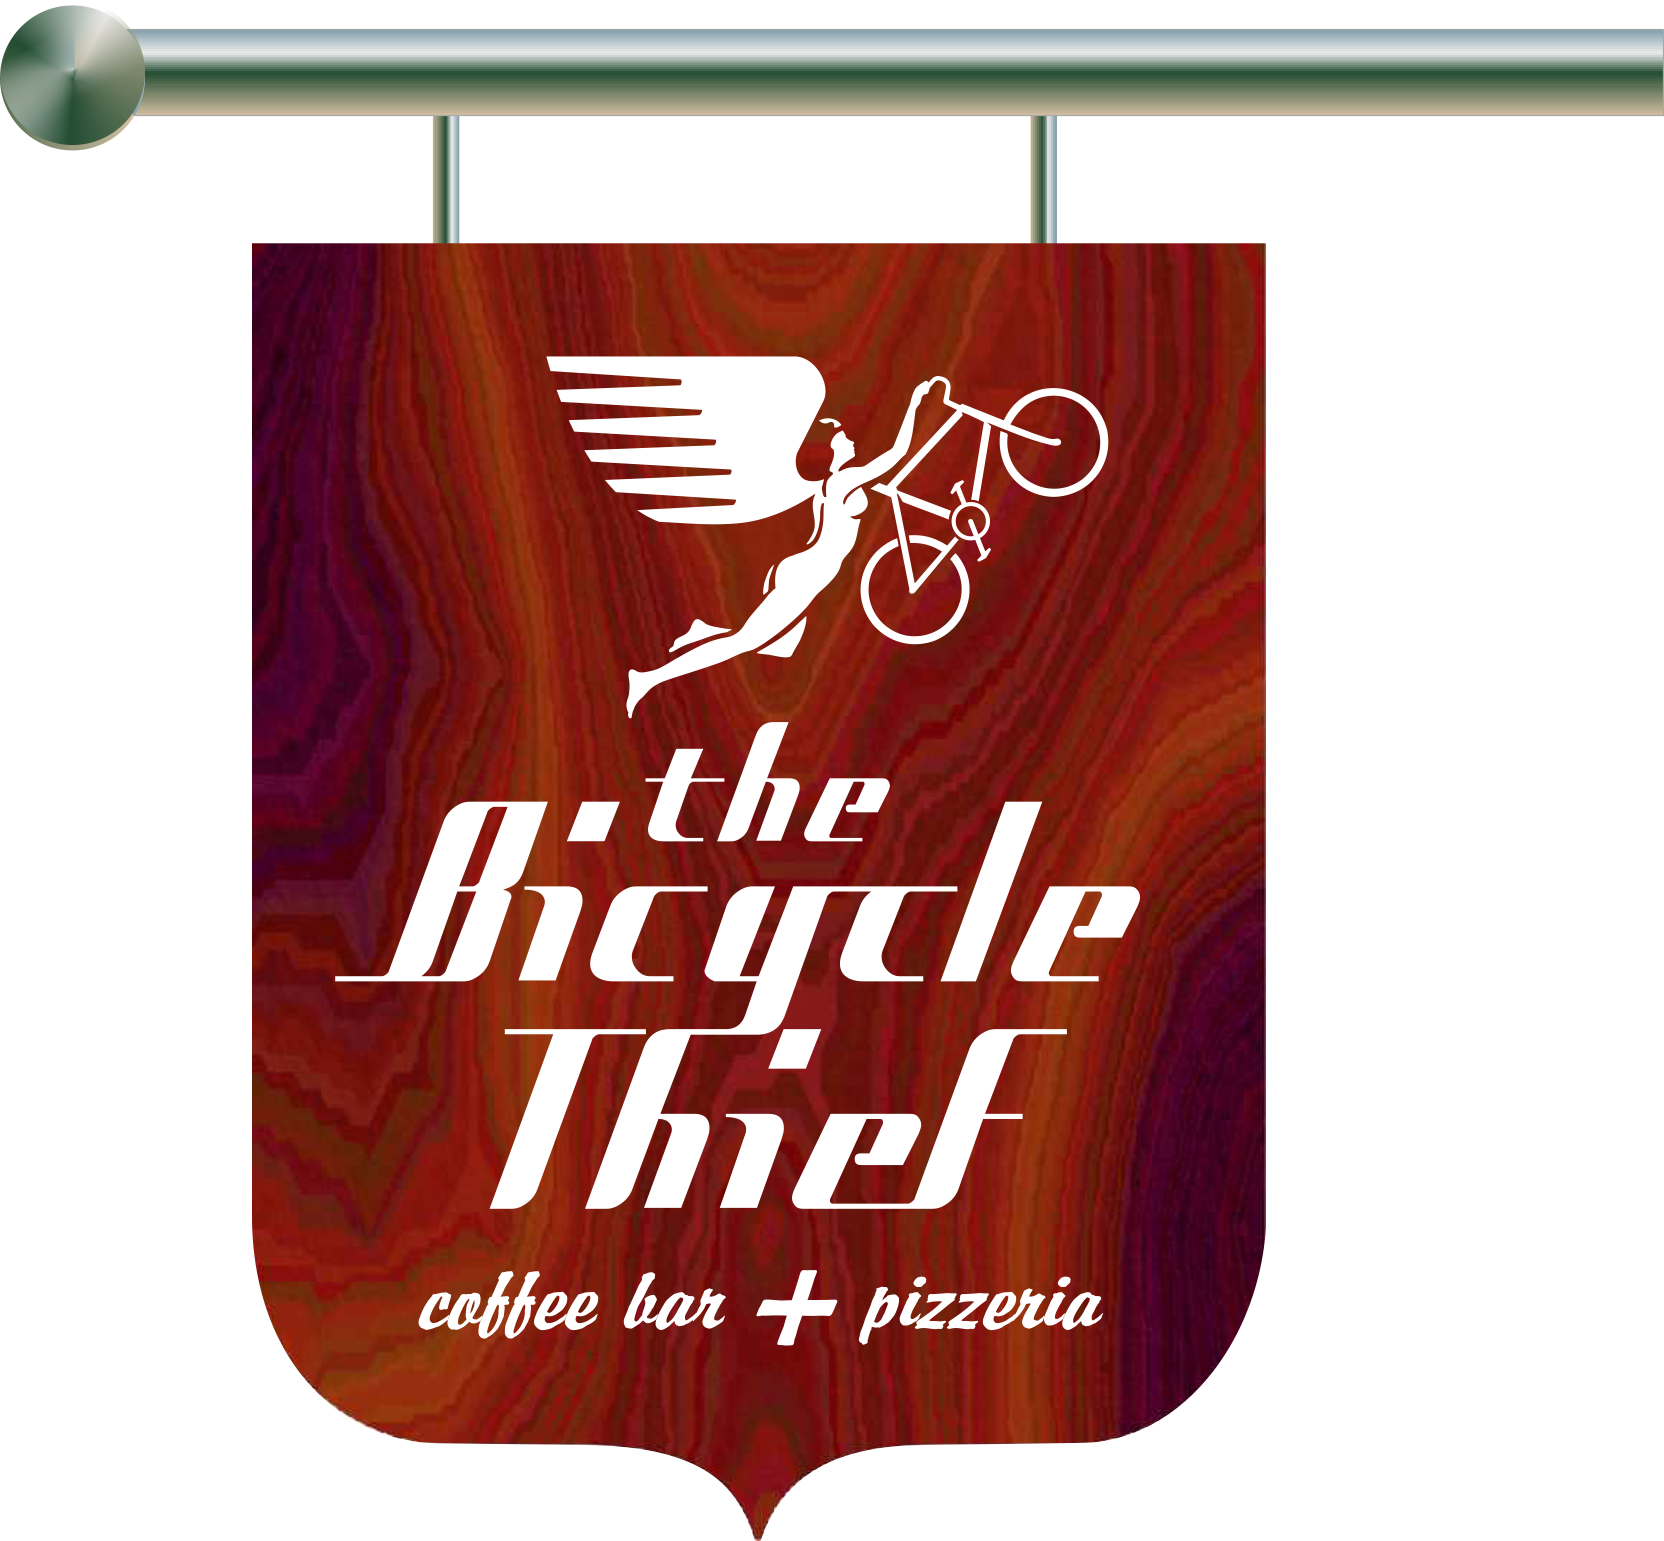 Bicycle_thief_sign.png